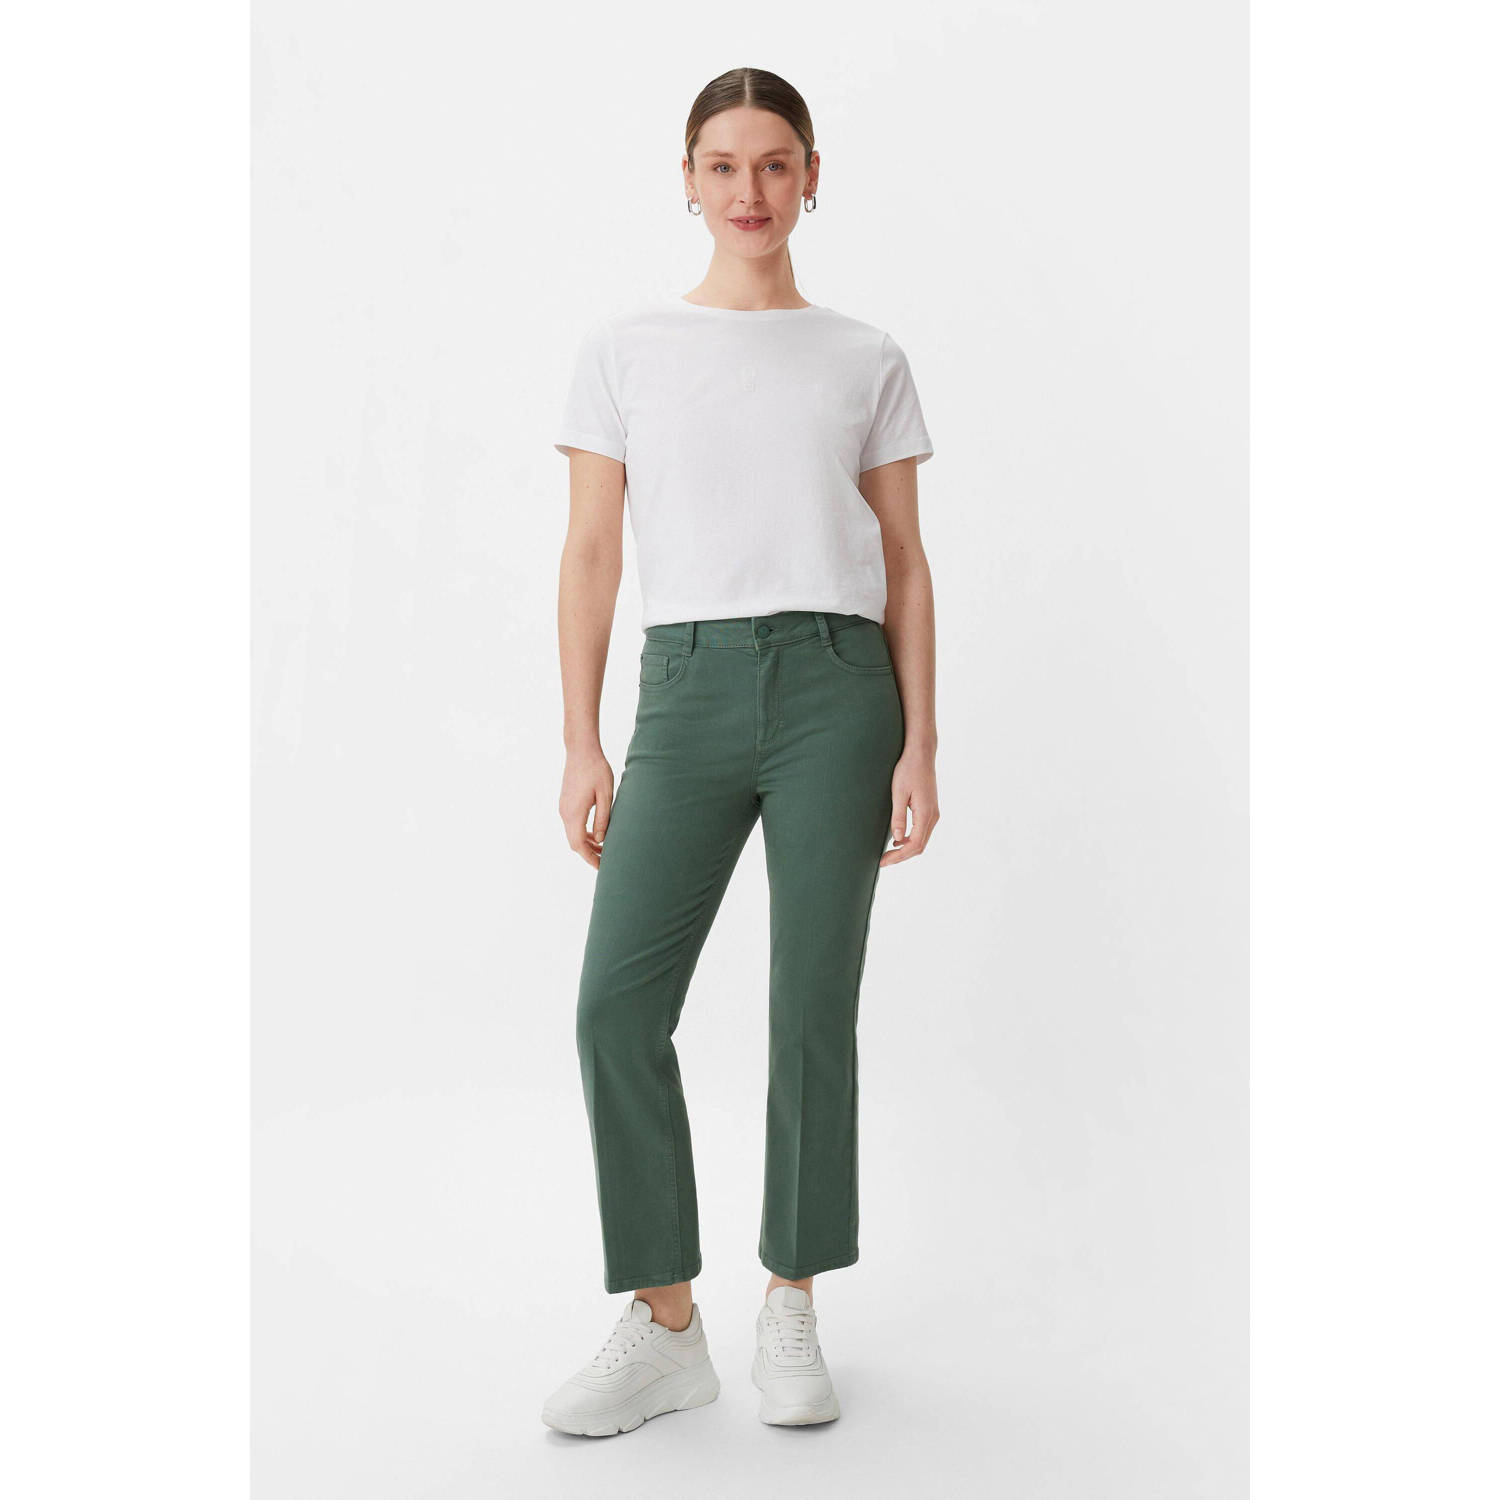 comma casual identity cropped flared broek donkergroen